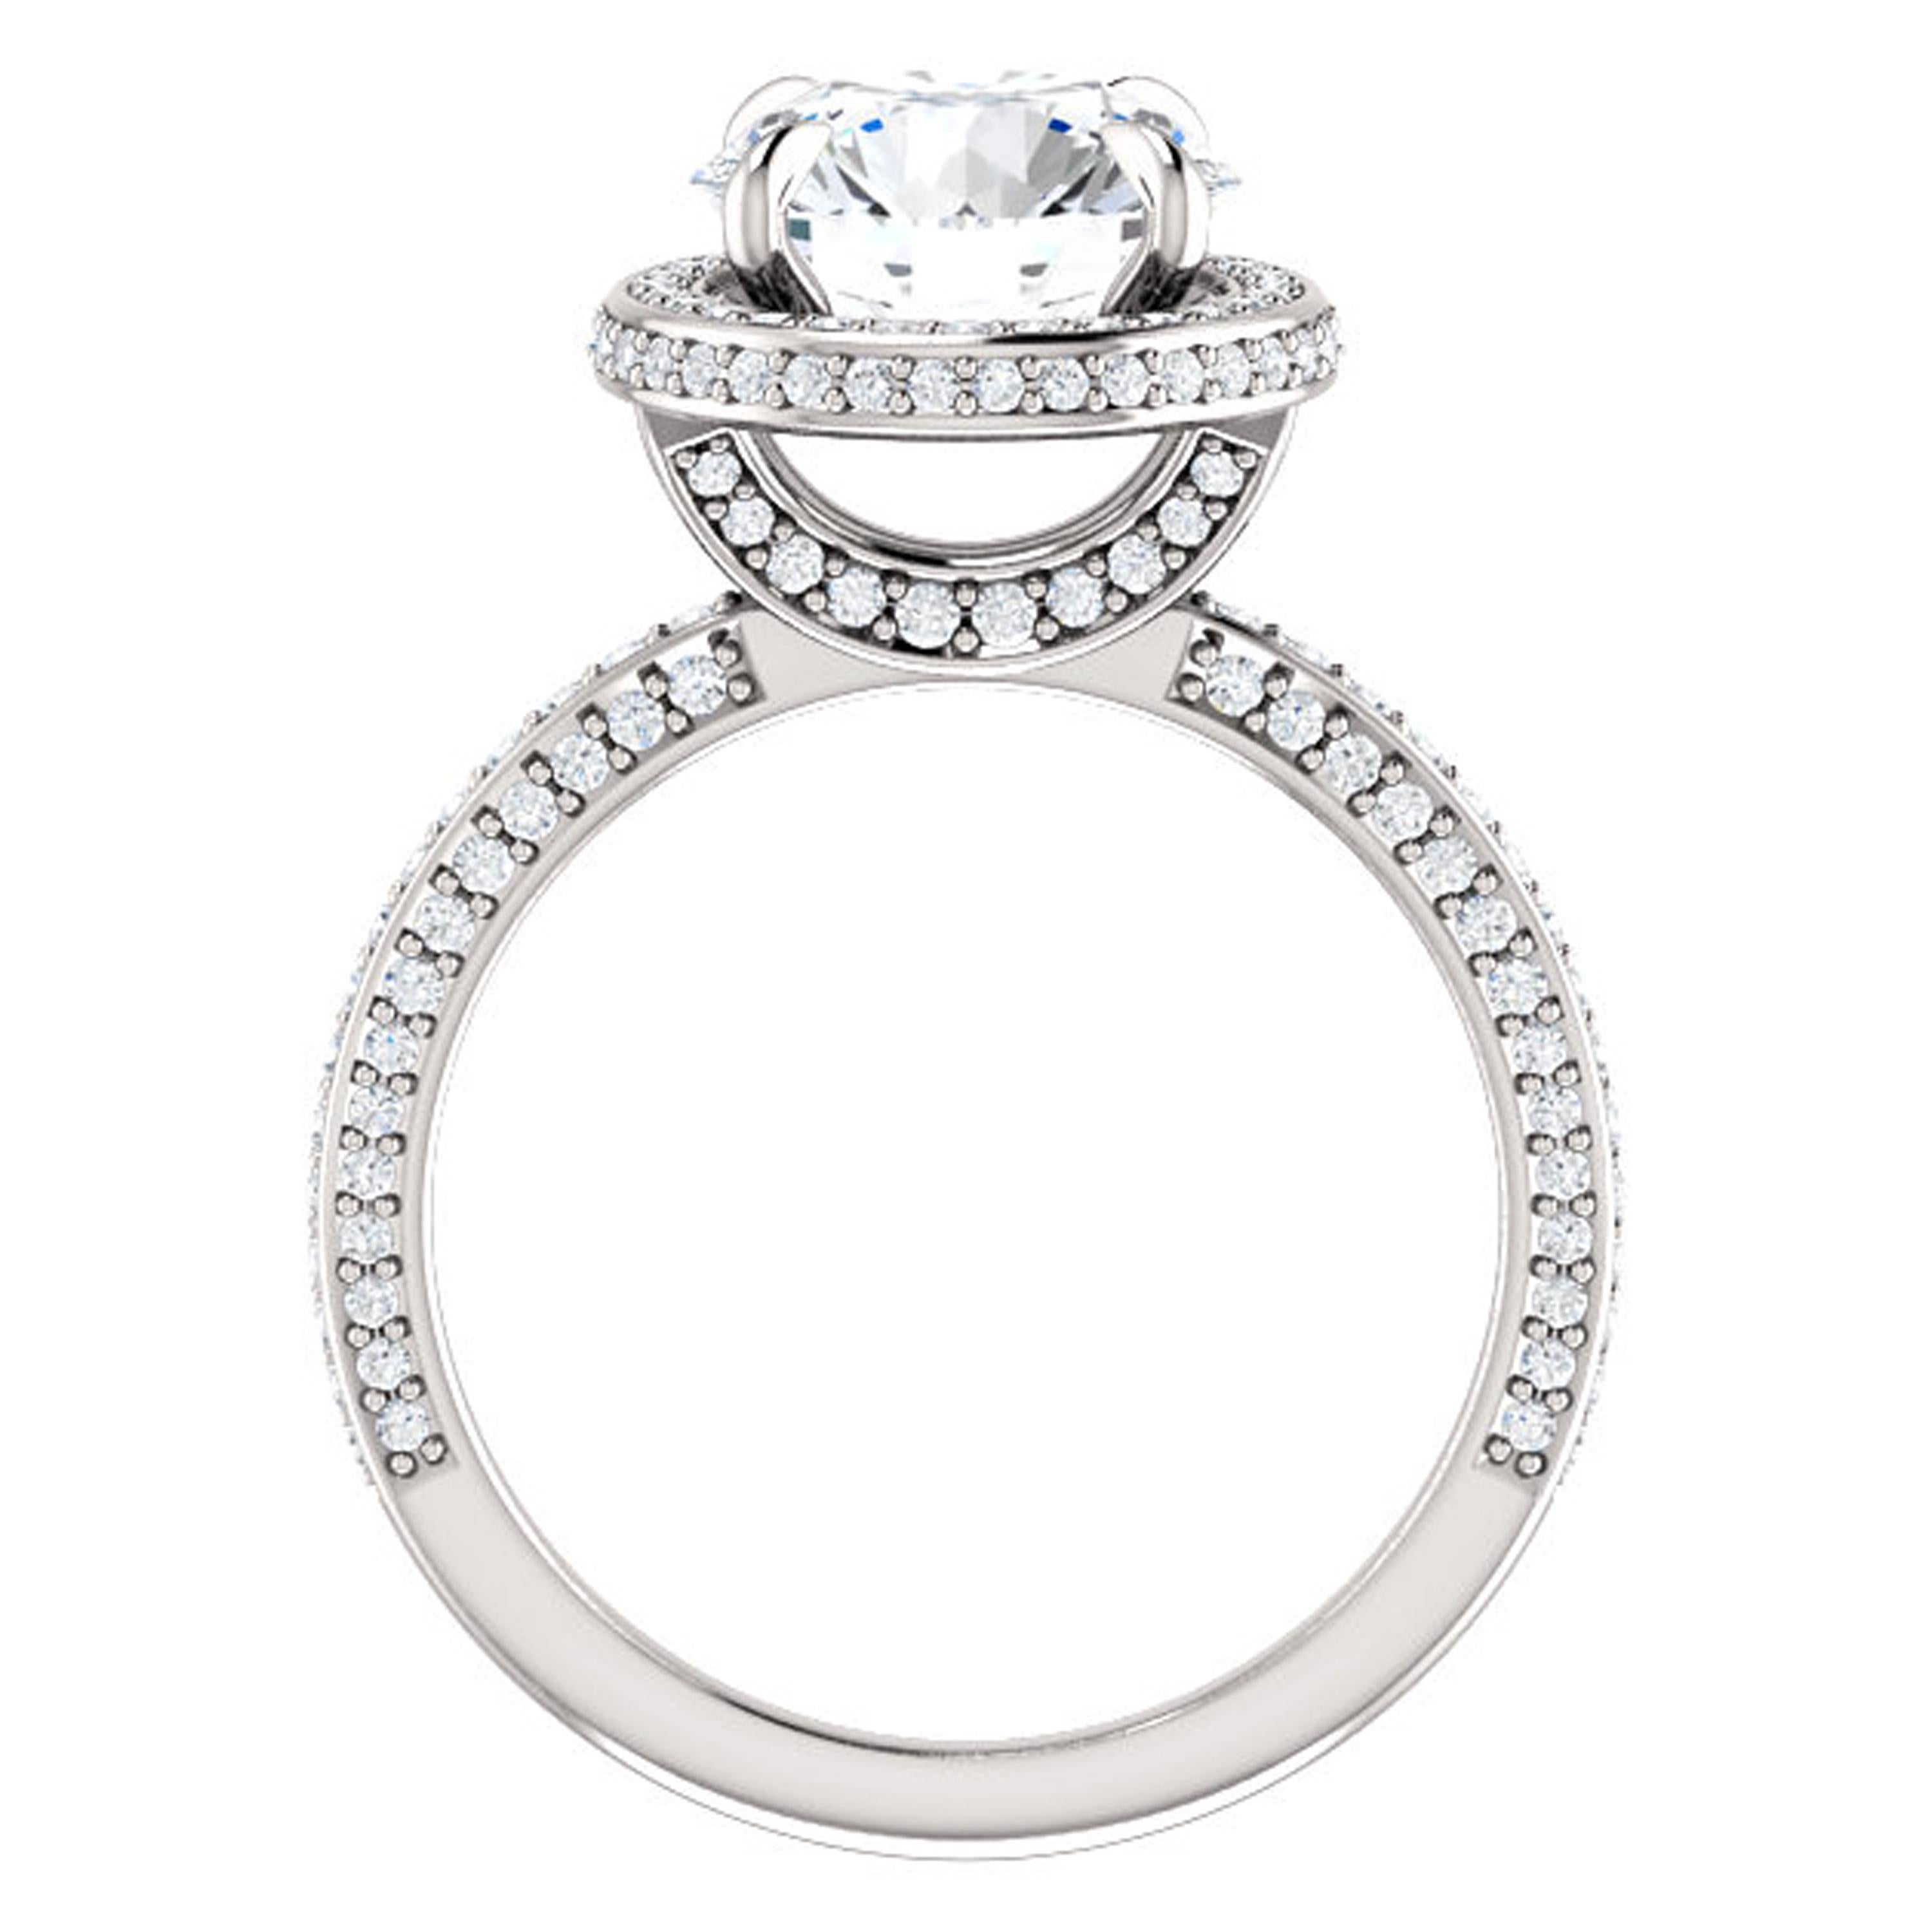 Multiple rows of lustrous diamonds dance along the shank of this one of a kind Valorenna engagement ring. Additional shimmering white diamonds surround the halo and make the GIA certified center stone appear bigger. Visible through the gallery,